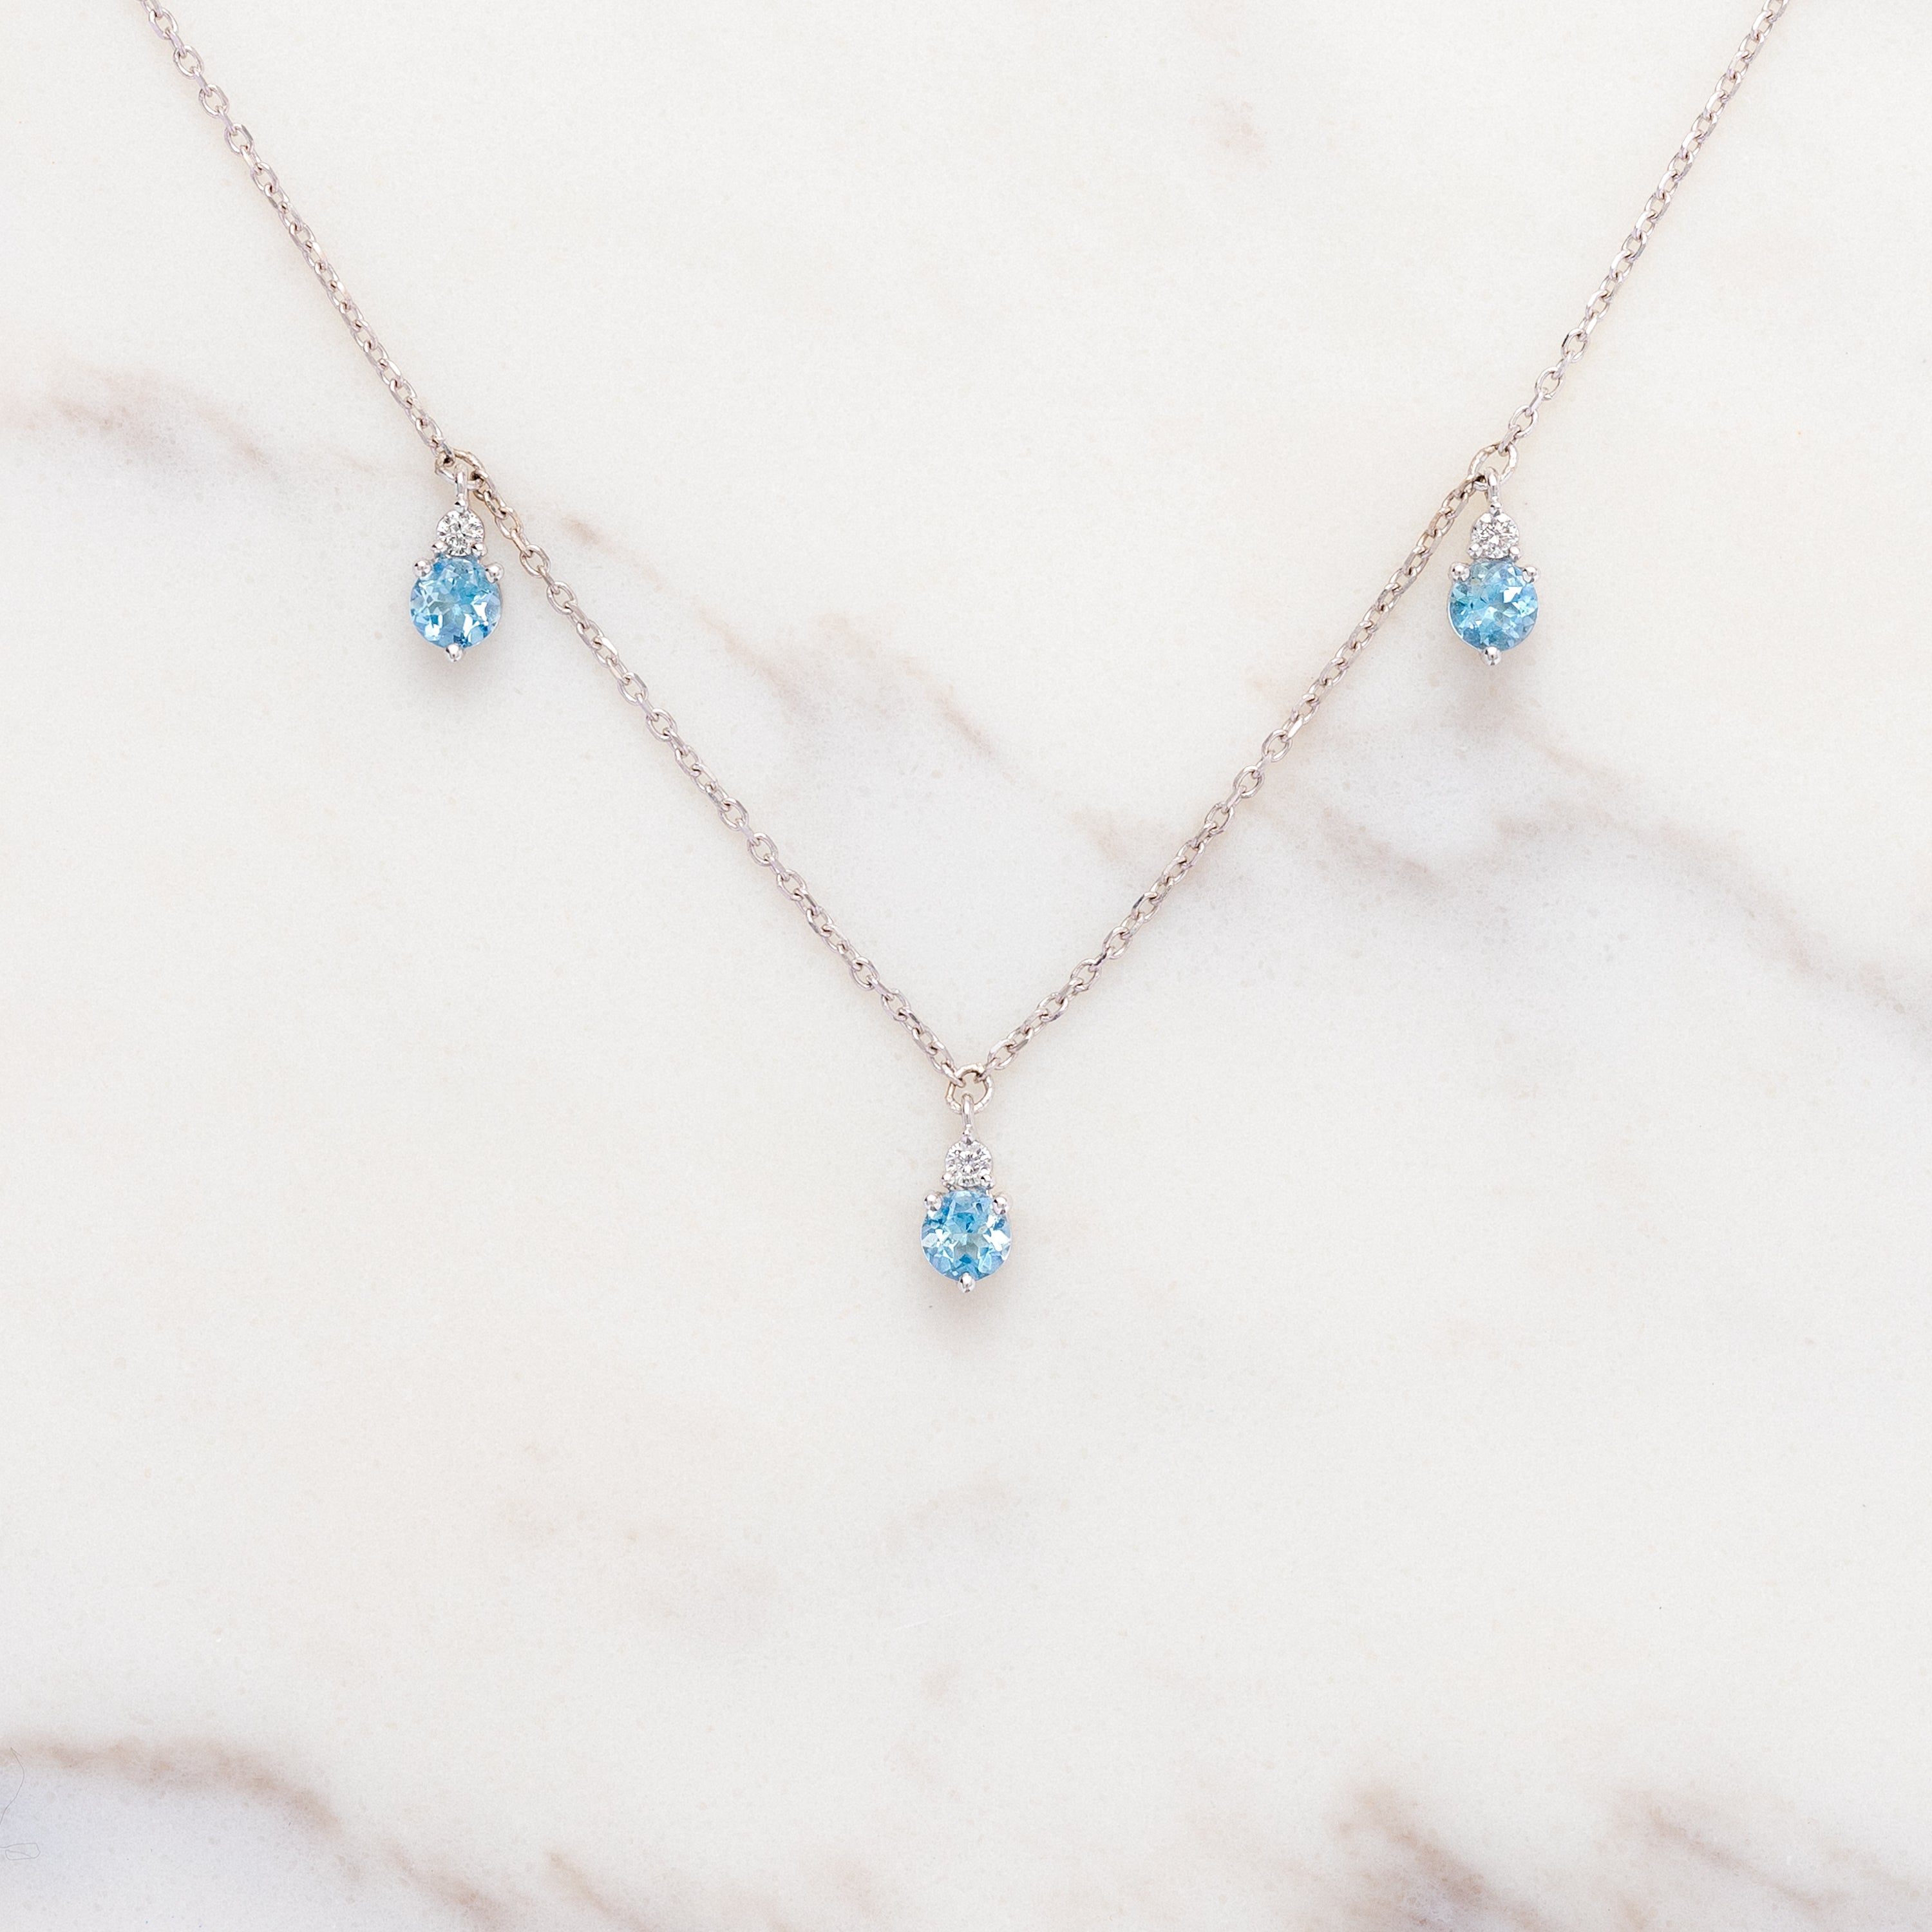 Buy 14k Yellow Gold by the Yard Blue Topaz Station Necklace 16 18 20 Online  in India - Etsy